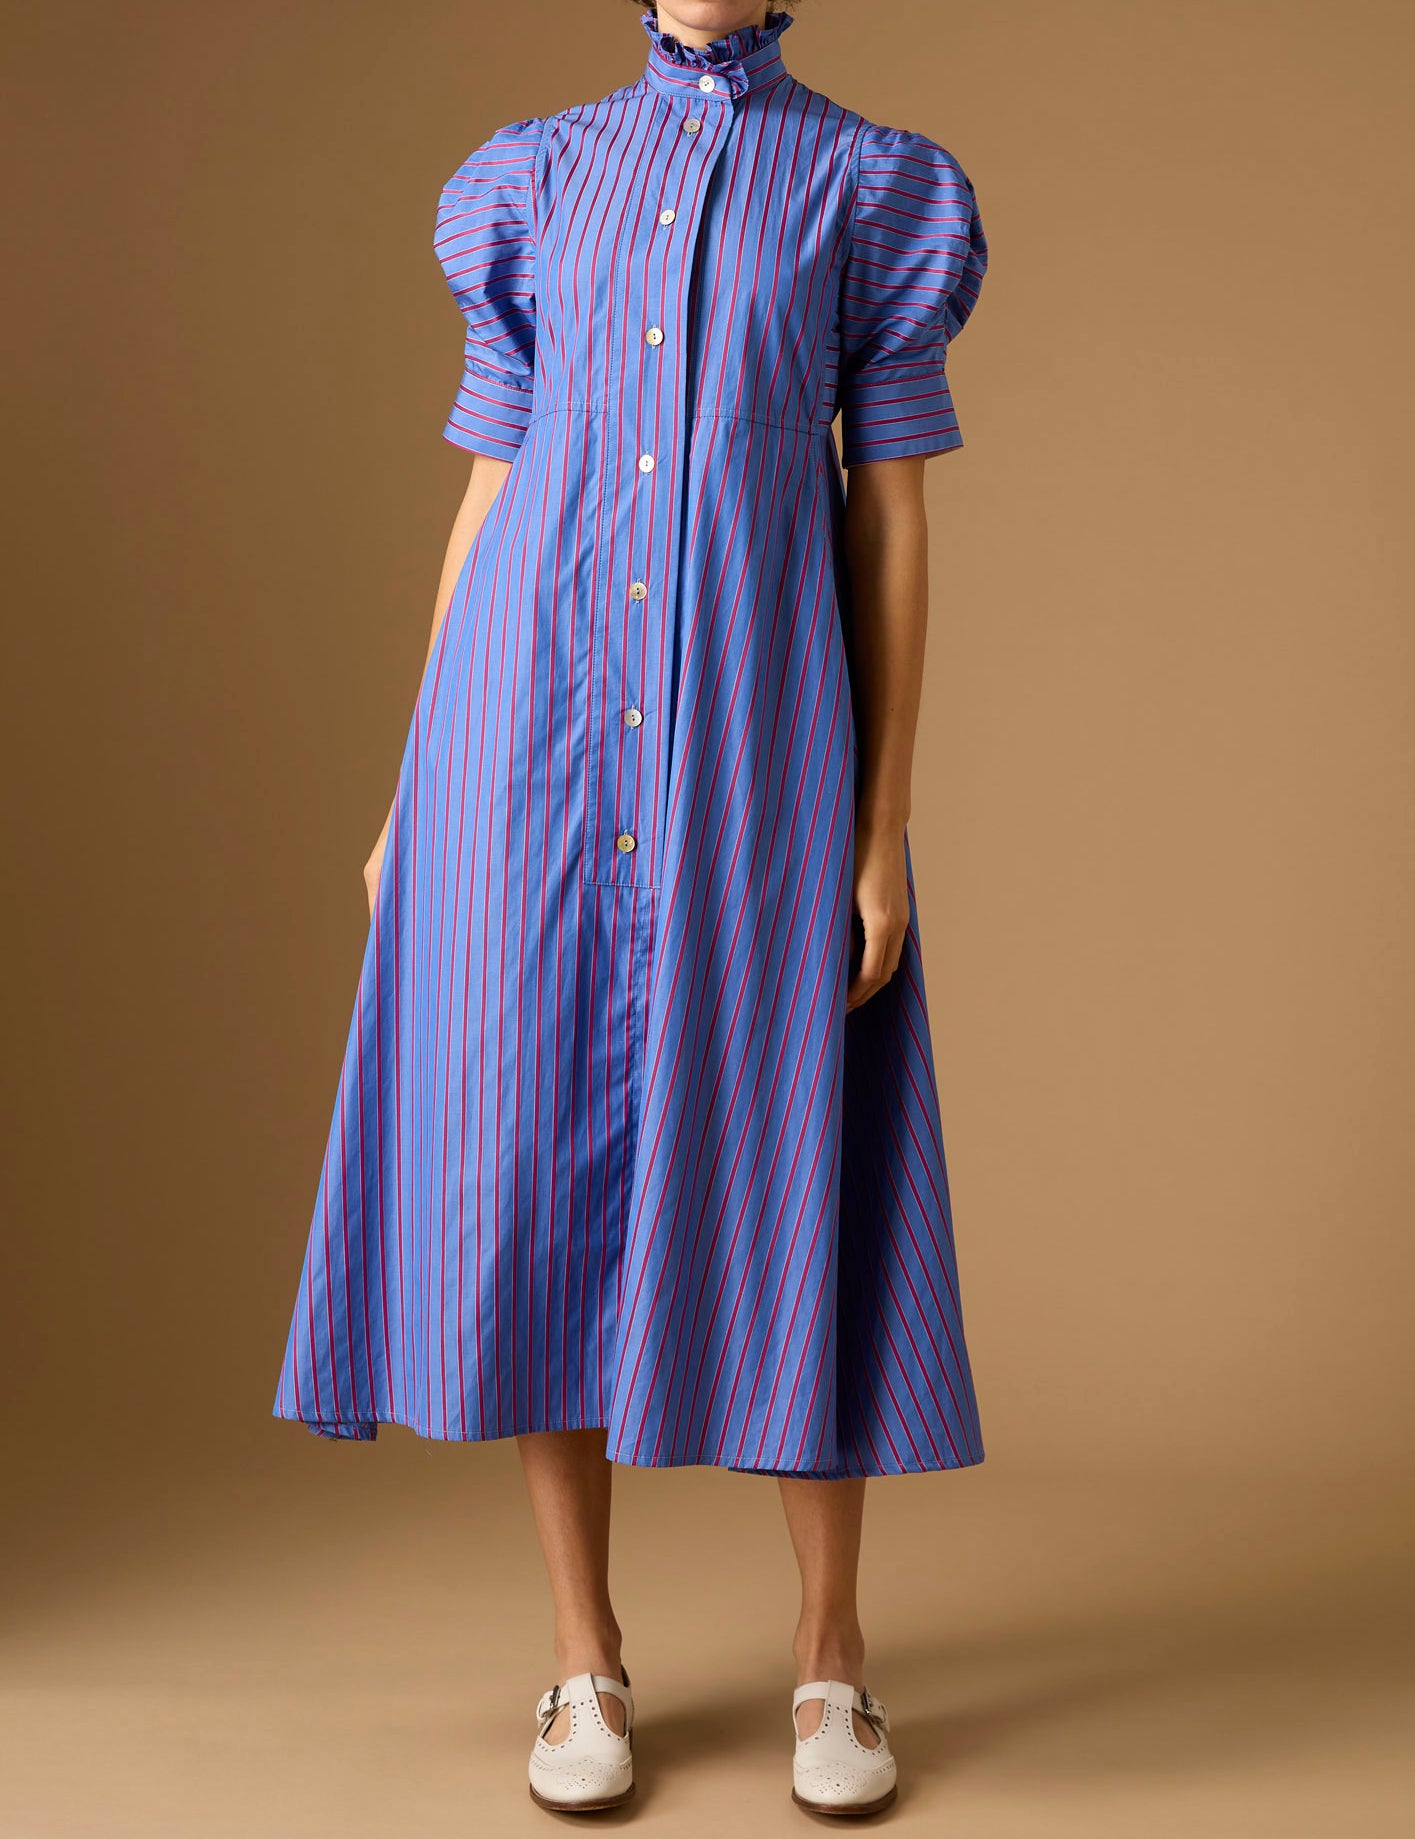 Front view of Venetia Bluet Cherry Stripes Dress by Thierry Colson